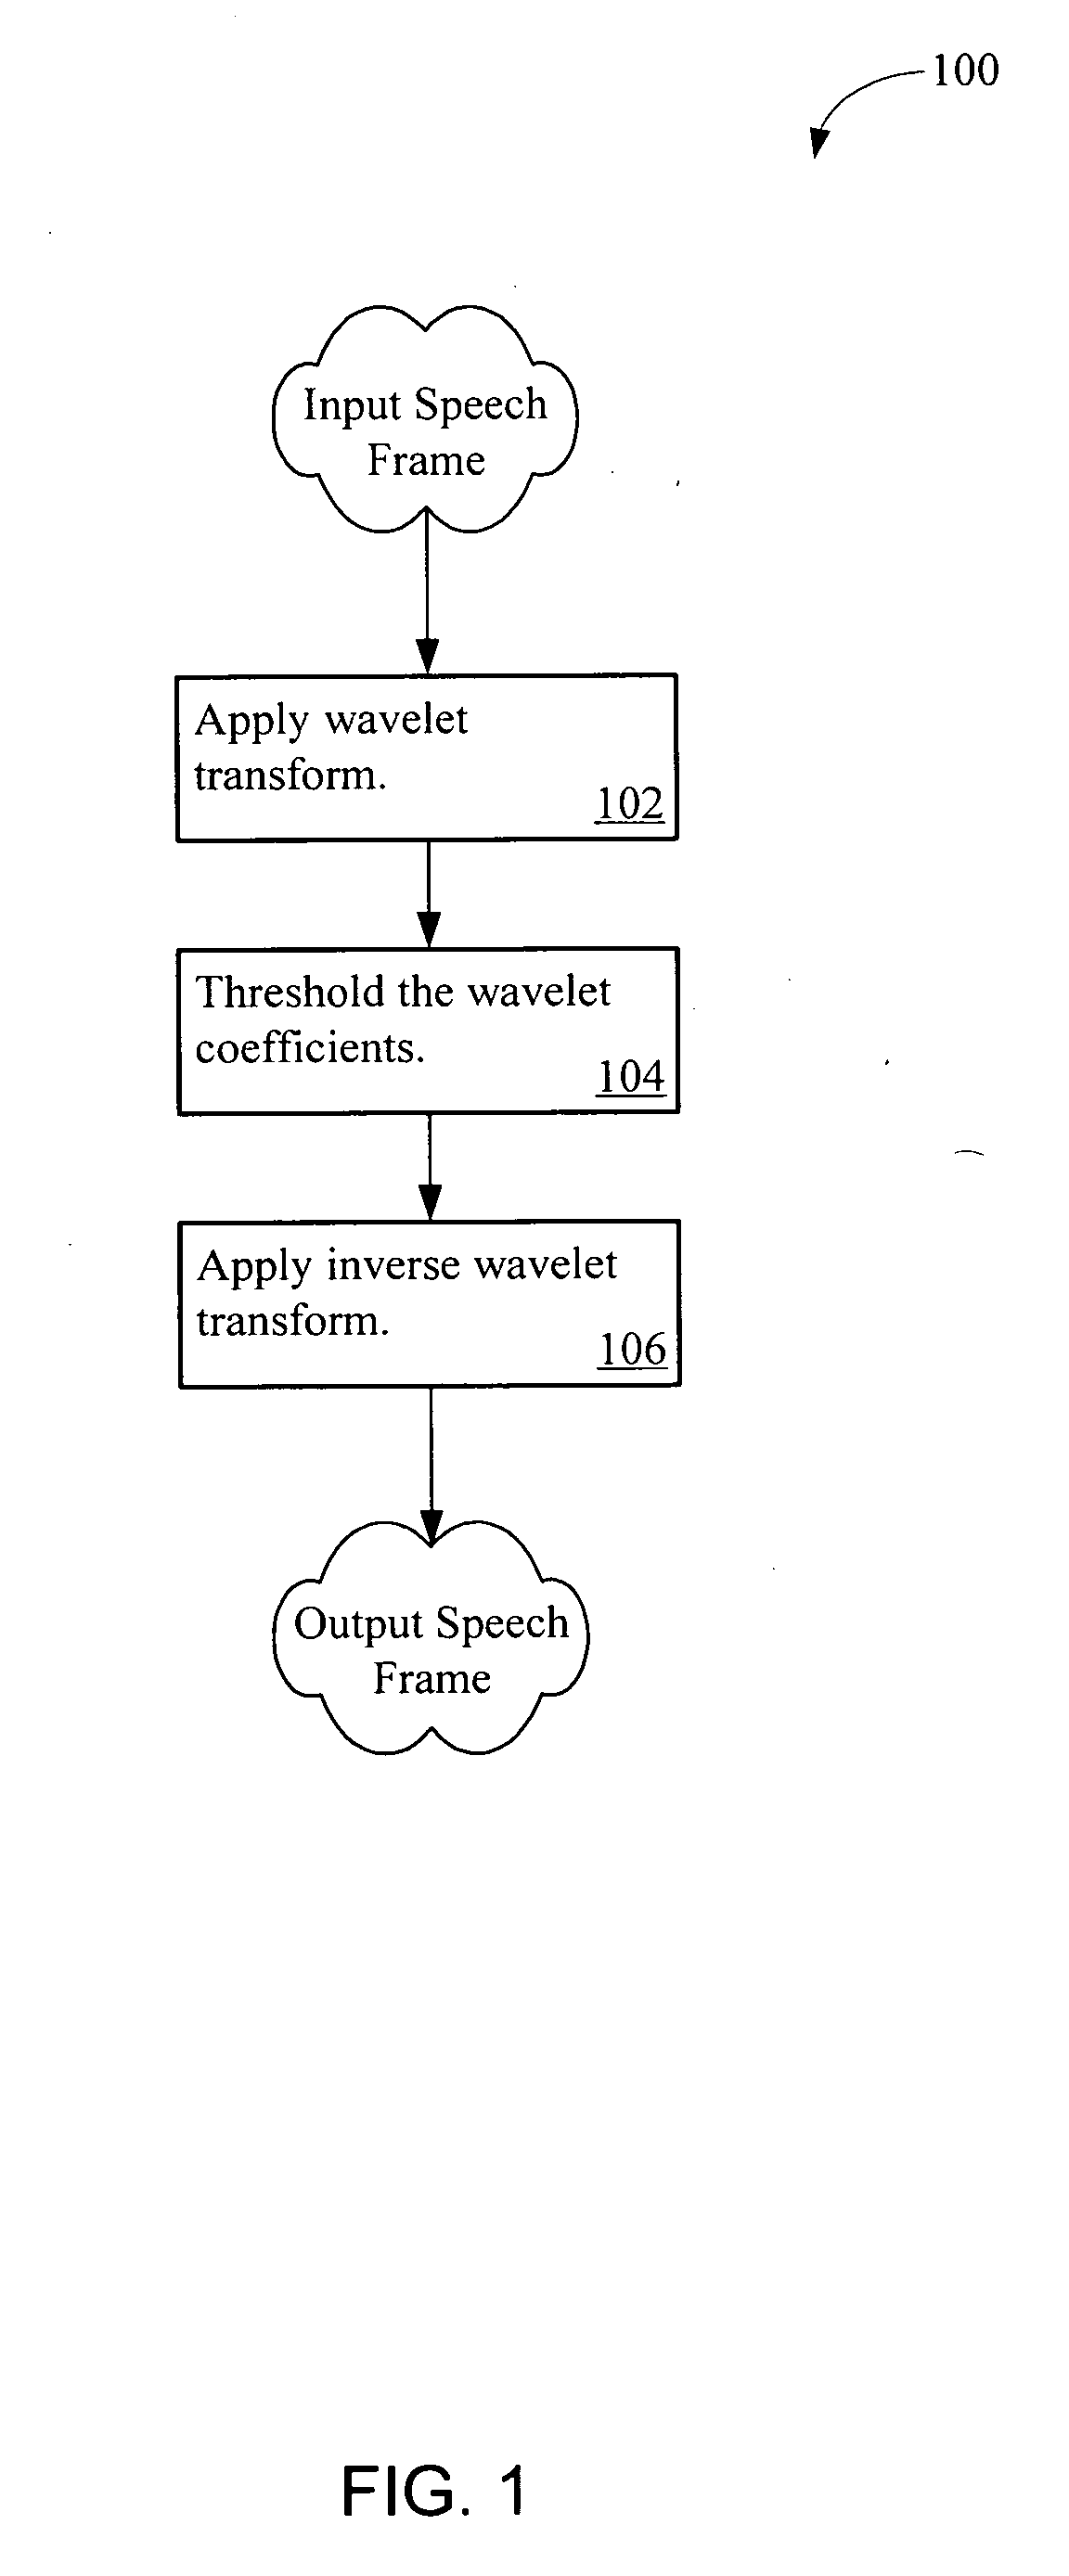 Transient noise removal system using wavelets